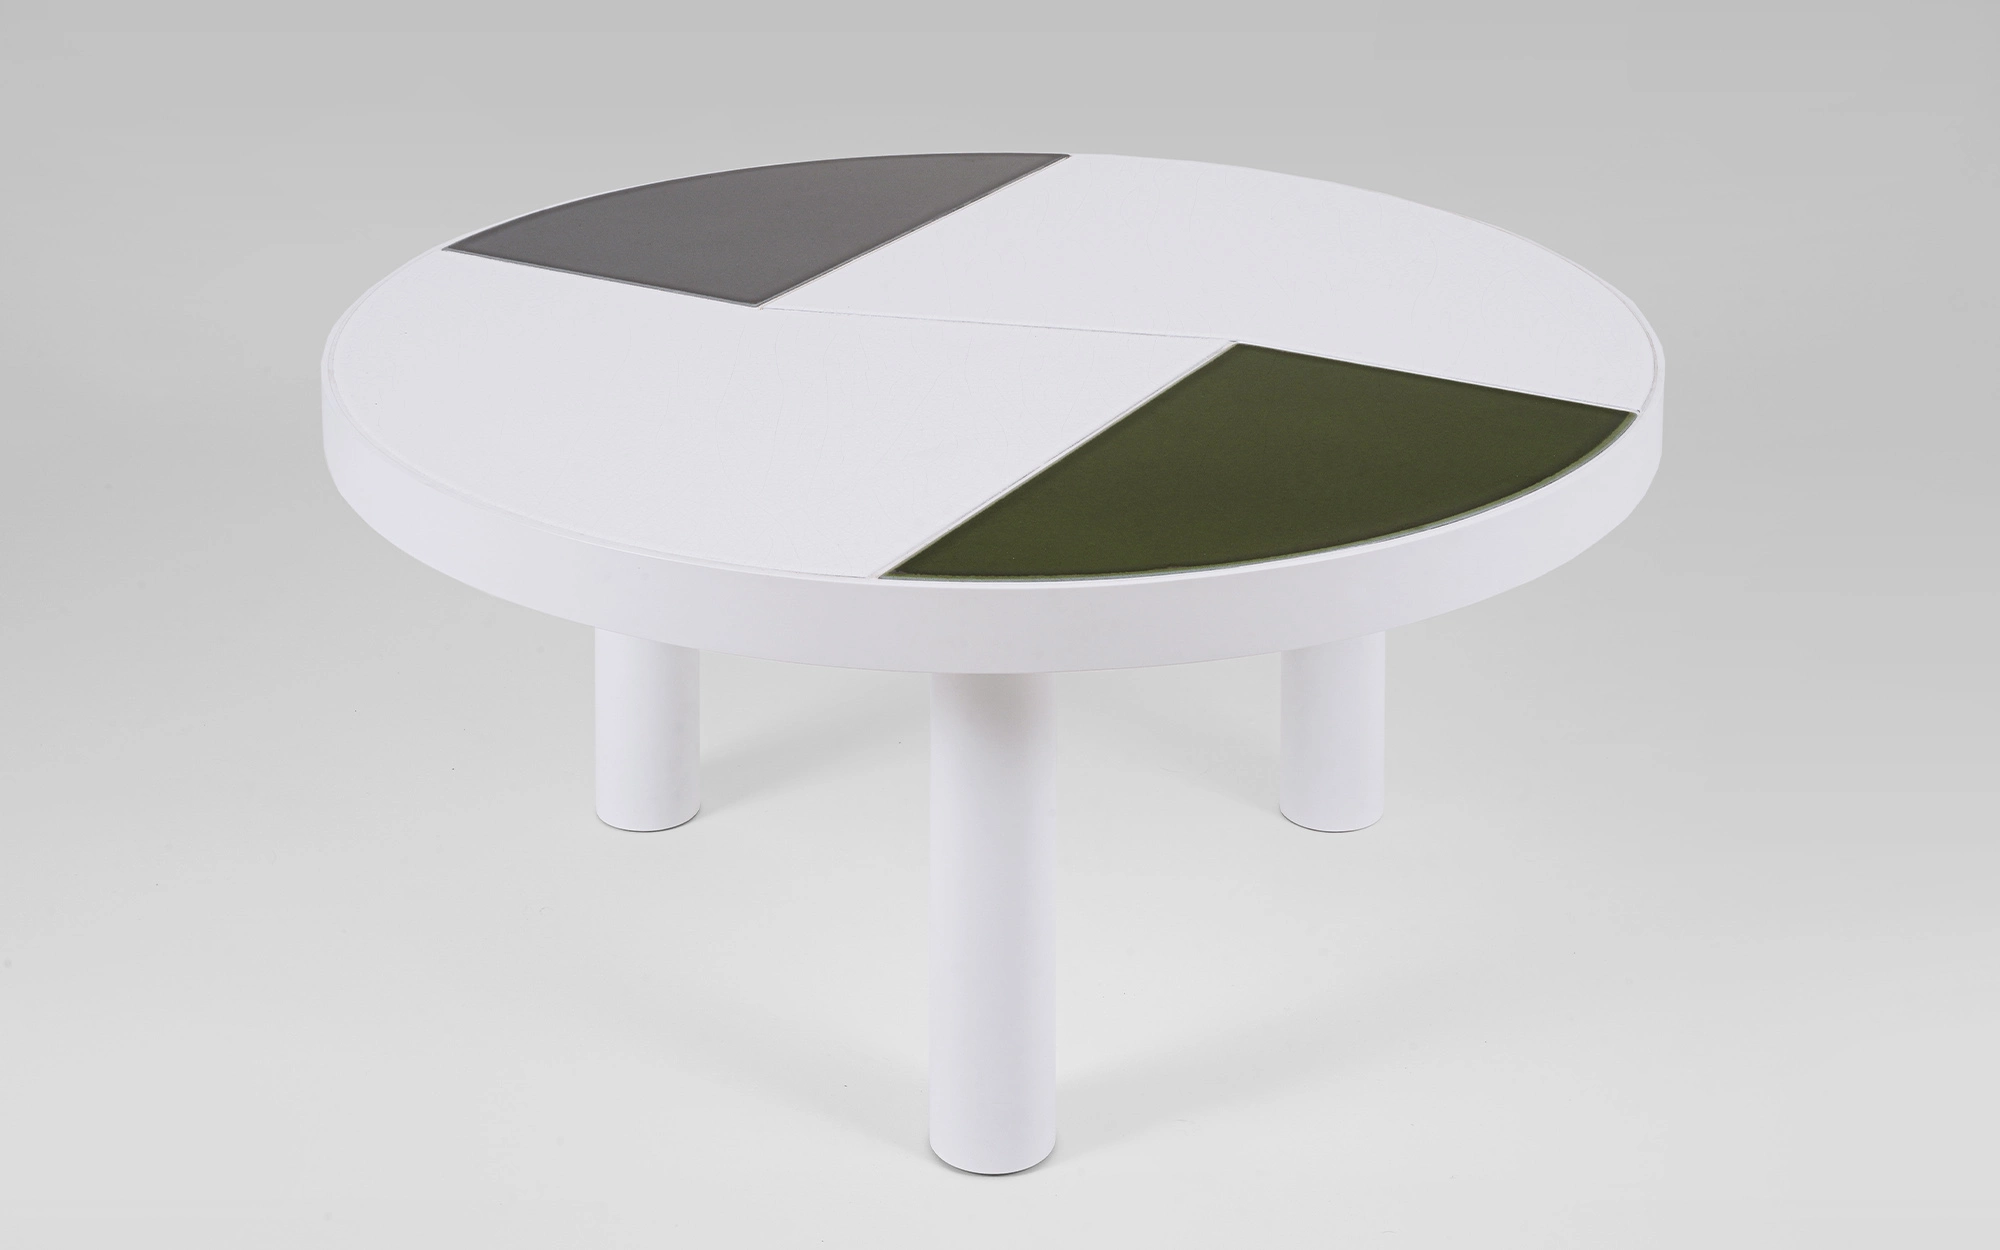 Fraction Coffee Table - Pierre Charpin - Art and Drawing - Galerie kreo